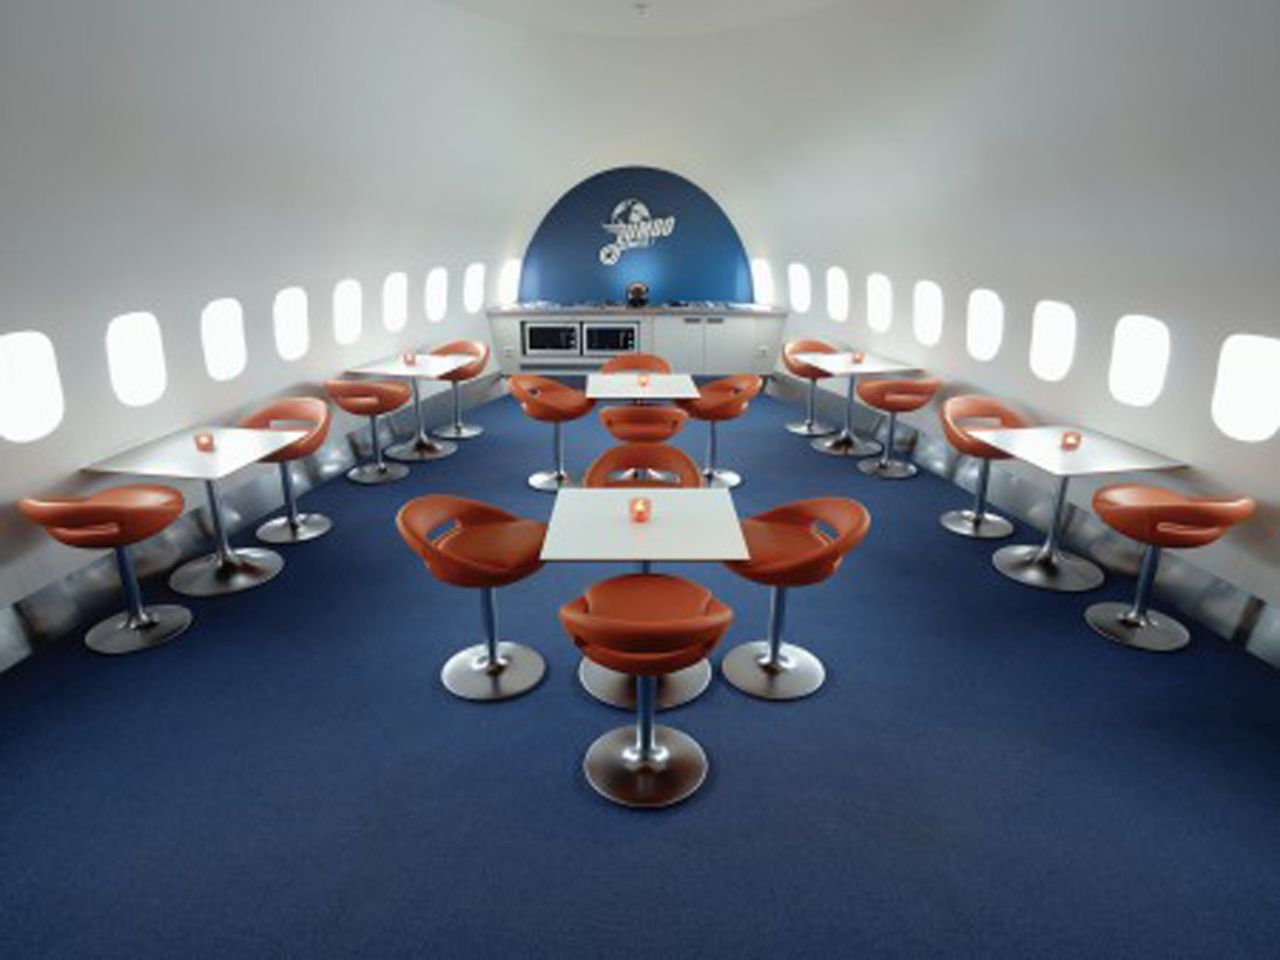 With commercial seats removed, airplanes look surprisingly larger inside. This is the dining area at Jumbo Stay.